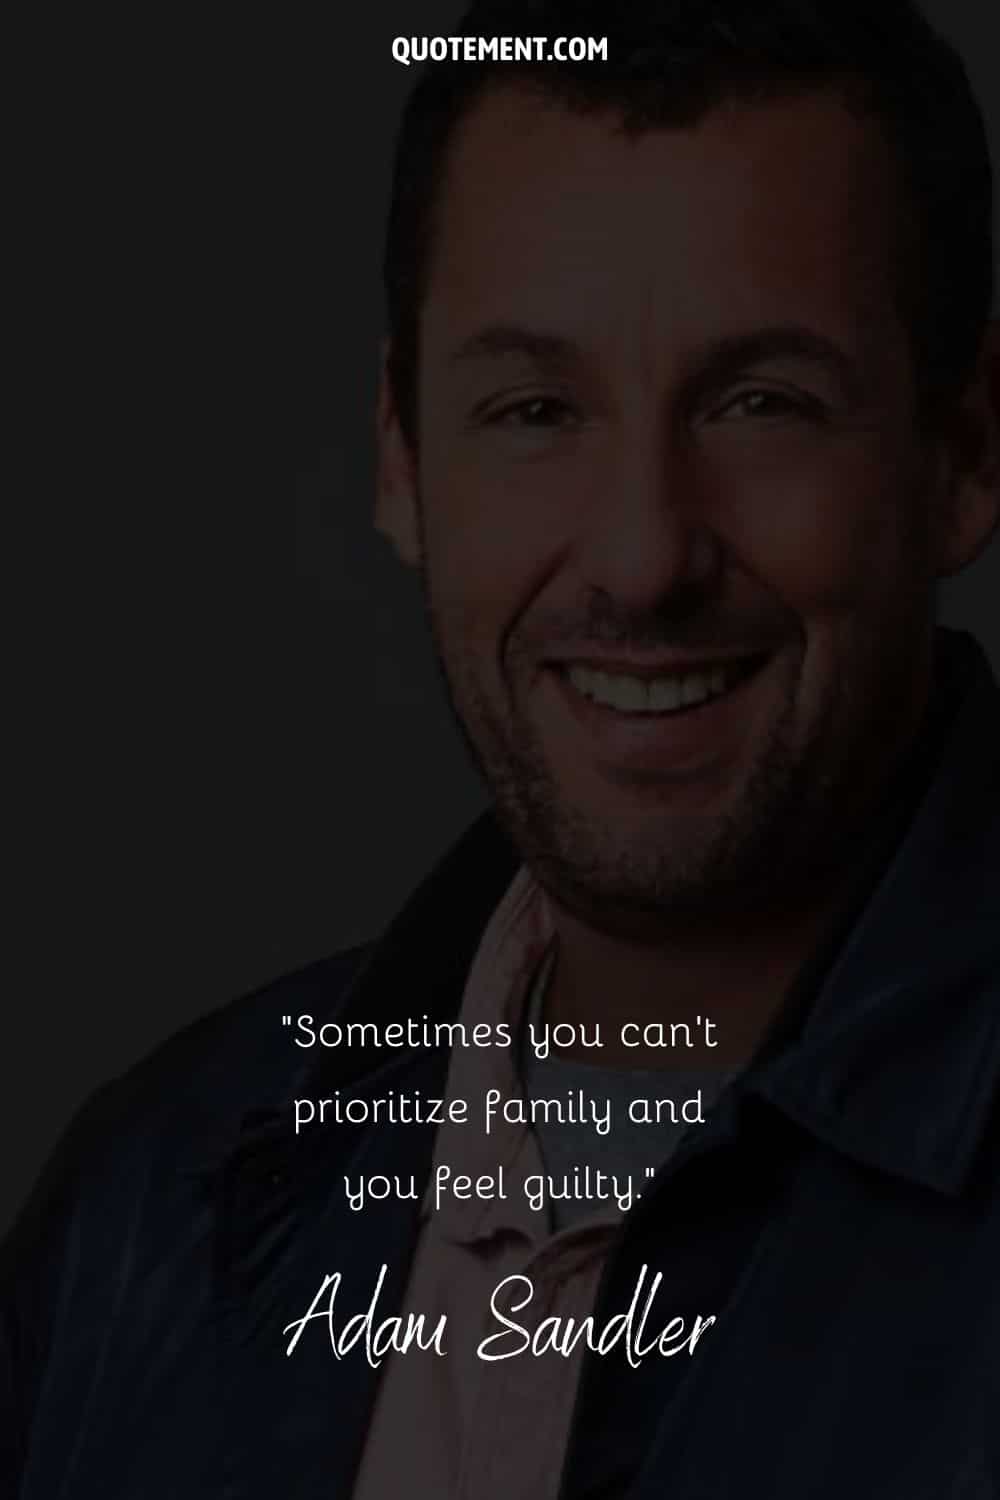 quote about neglecting family by Adam Sandler